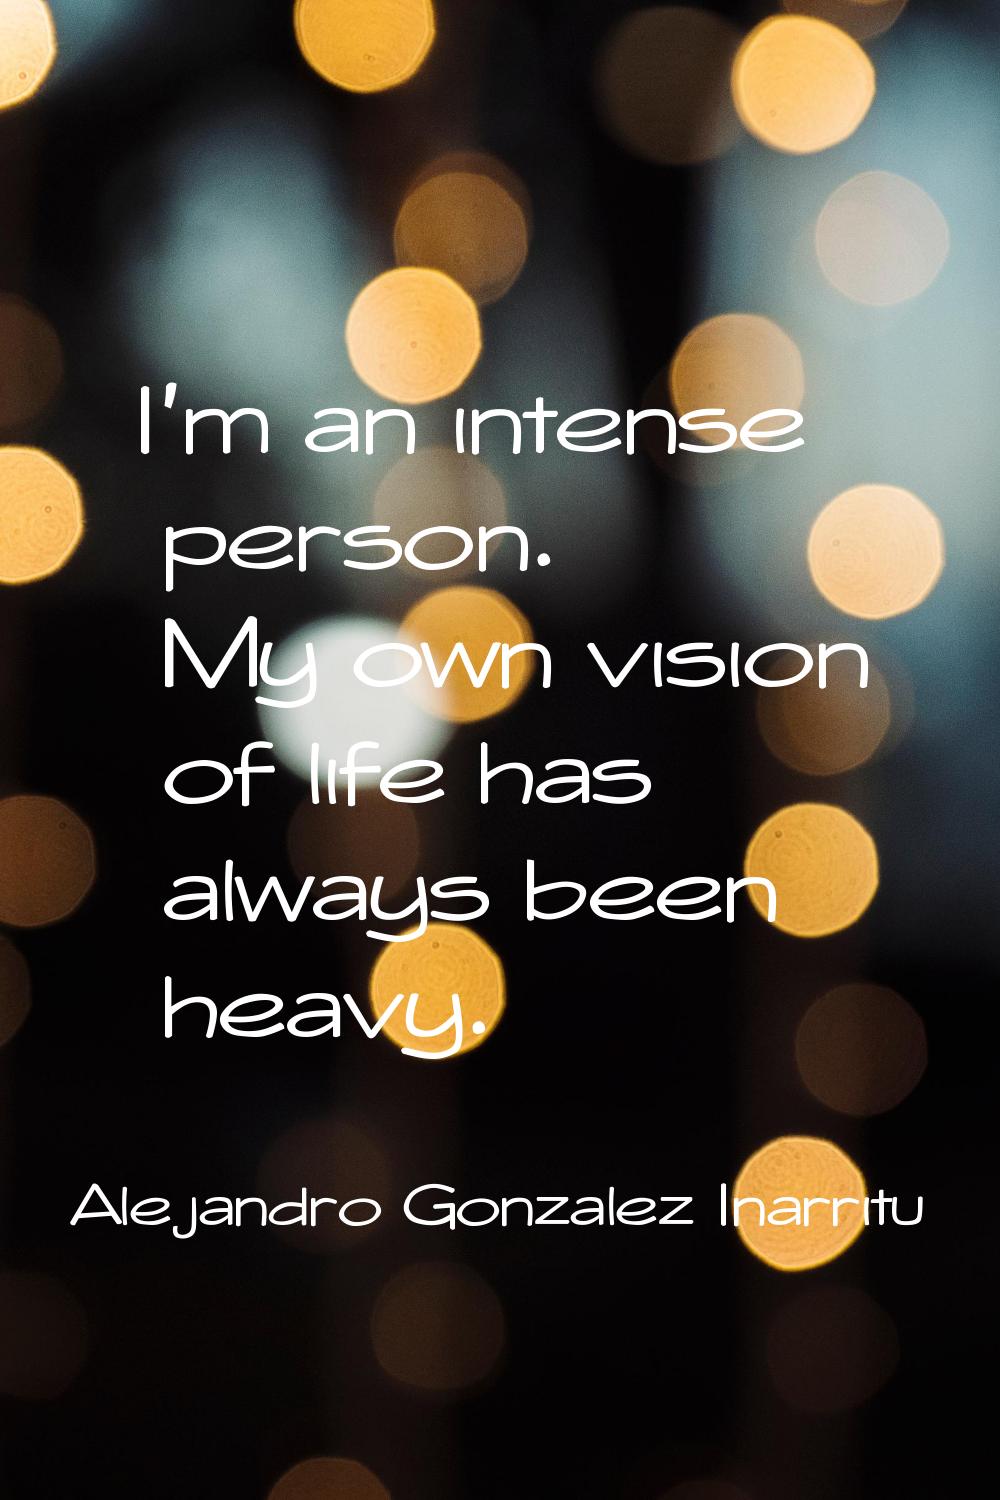 I'm an intense person. My own vision of life has always been heavy.